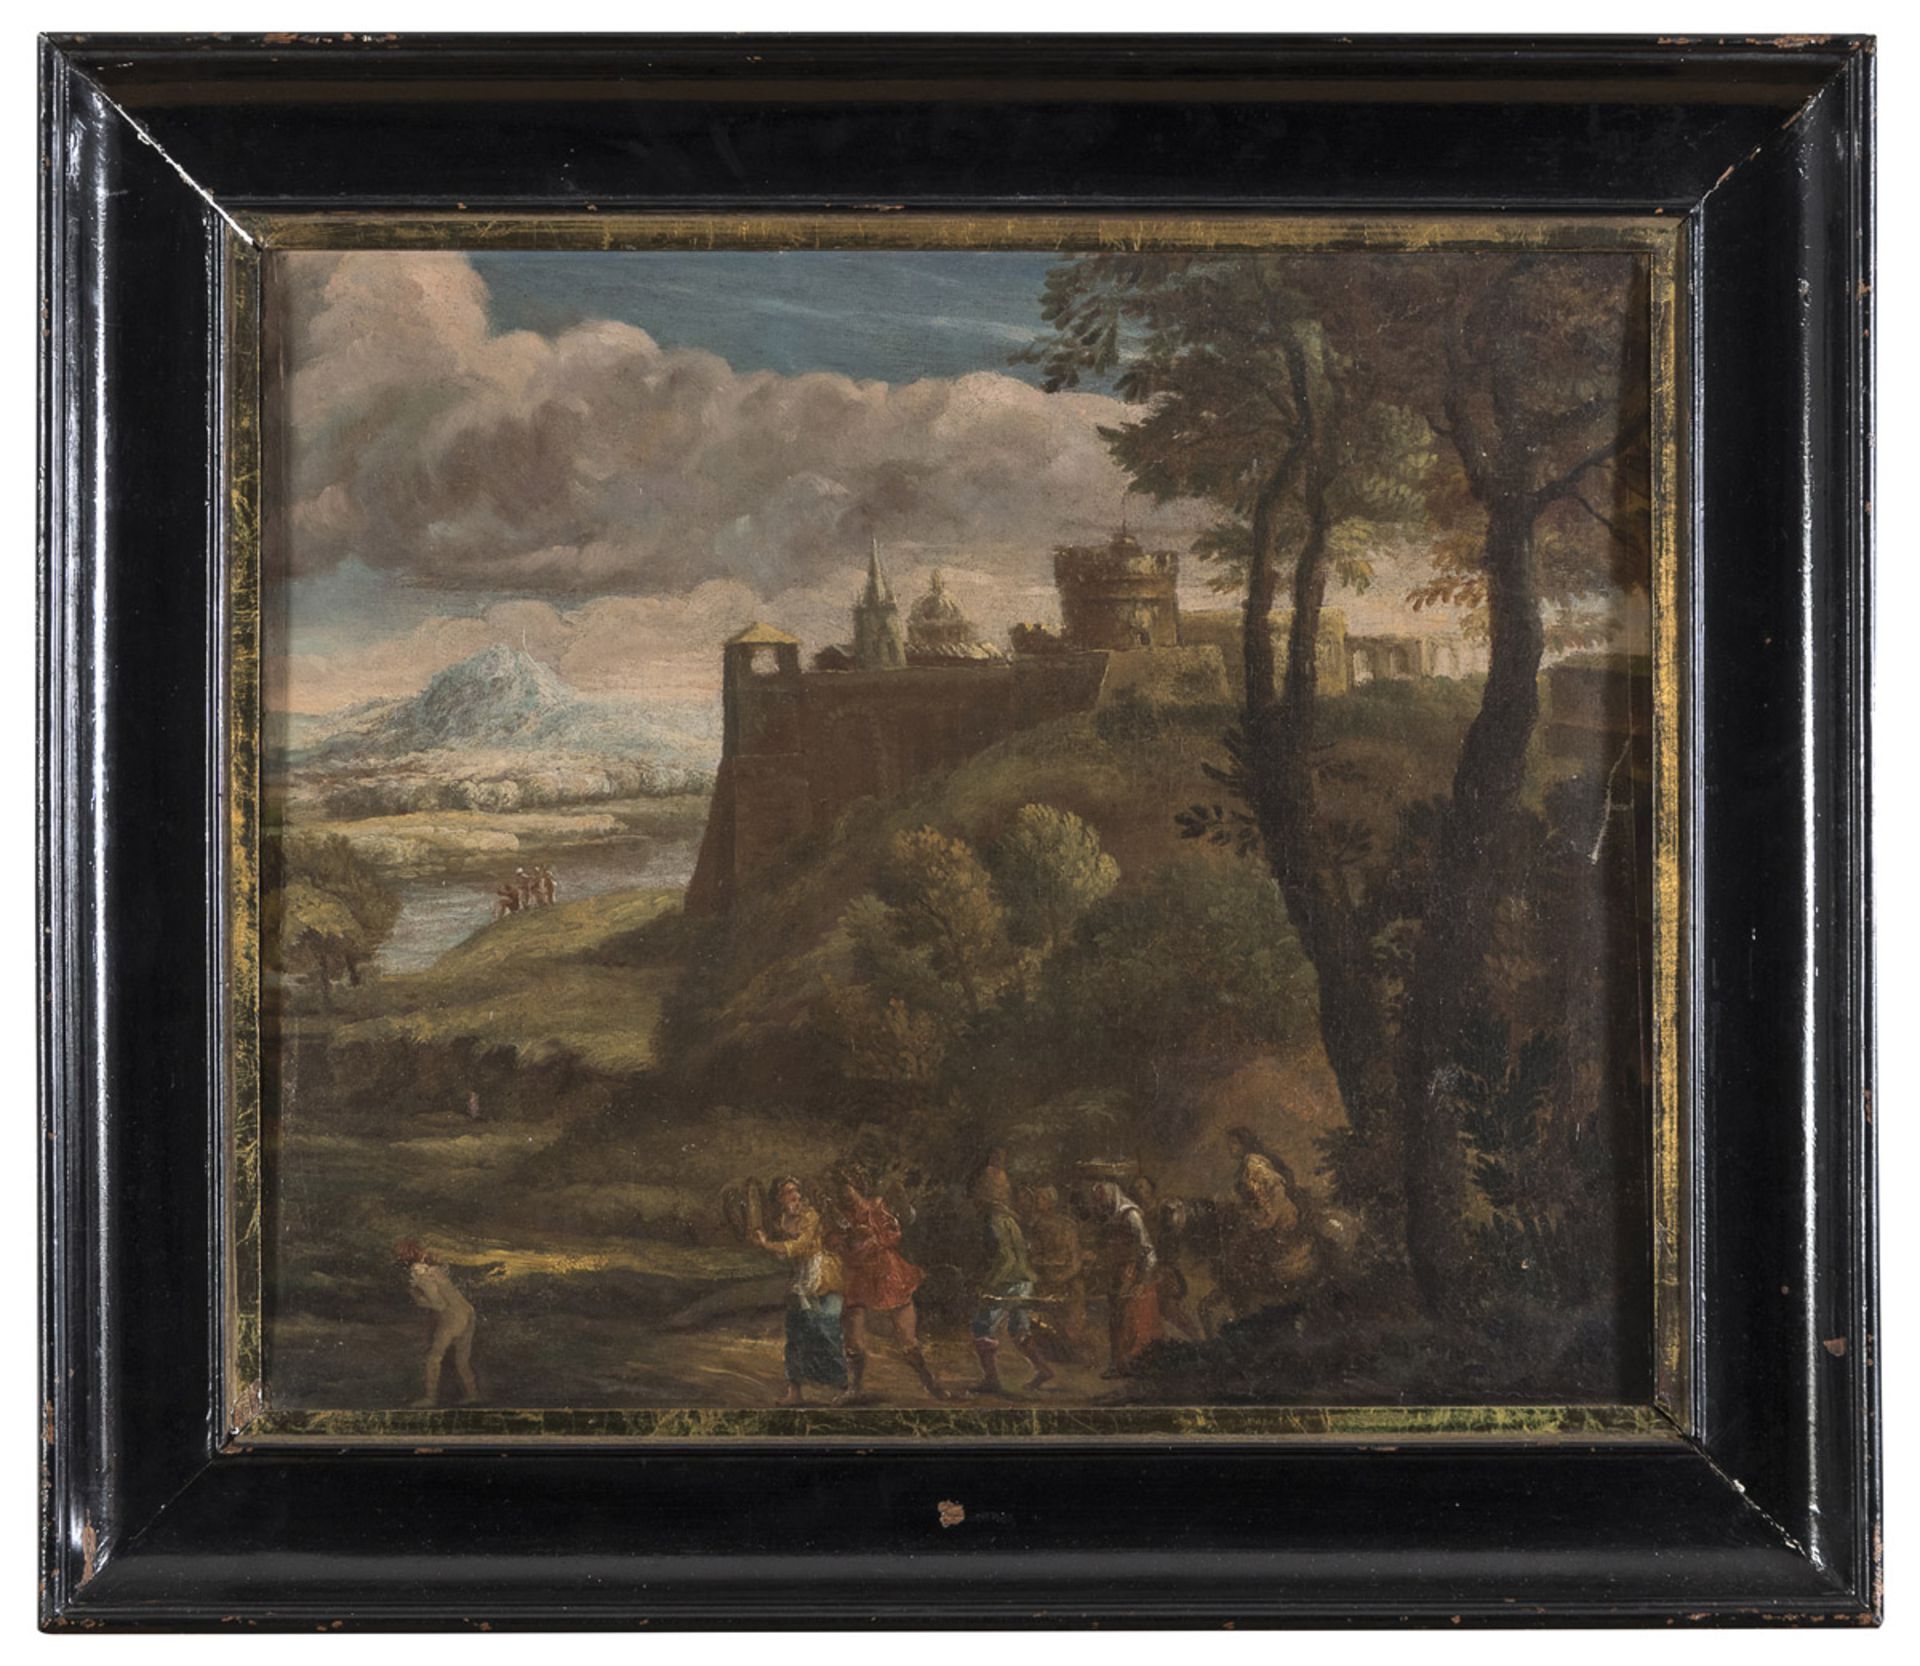 ROMAN PAINTER END OF THE 17TH CENTURY